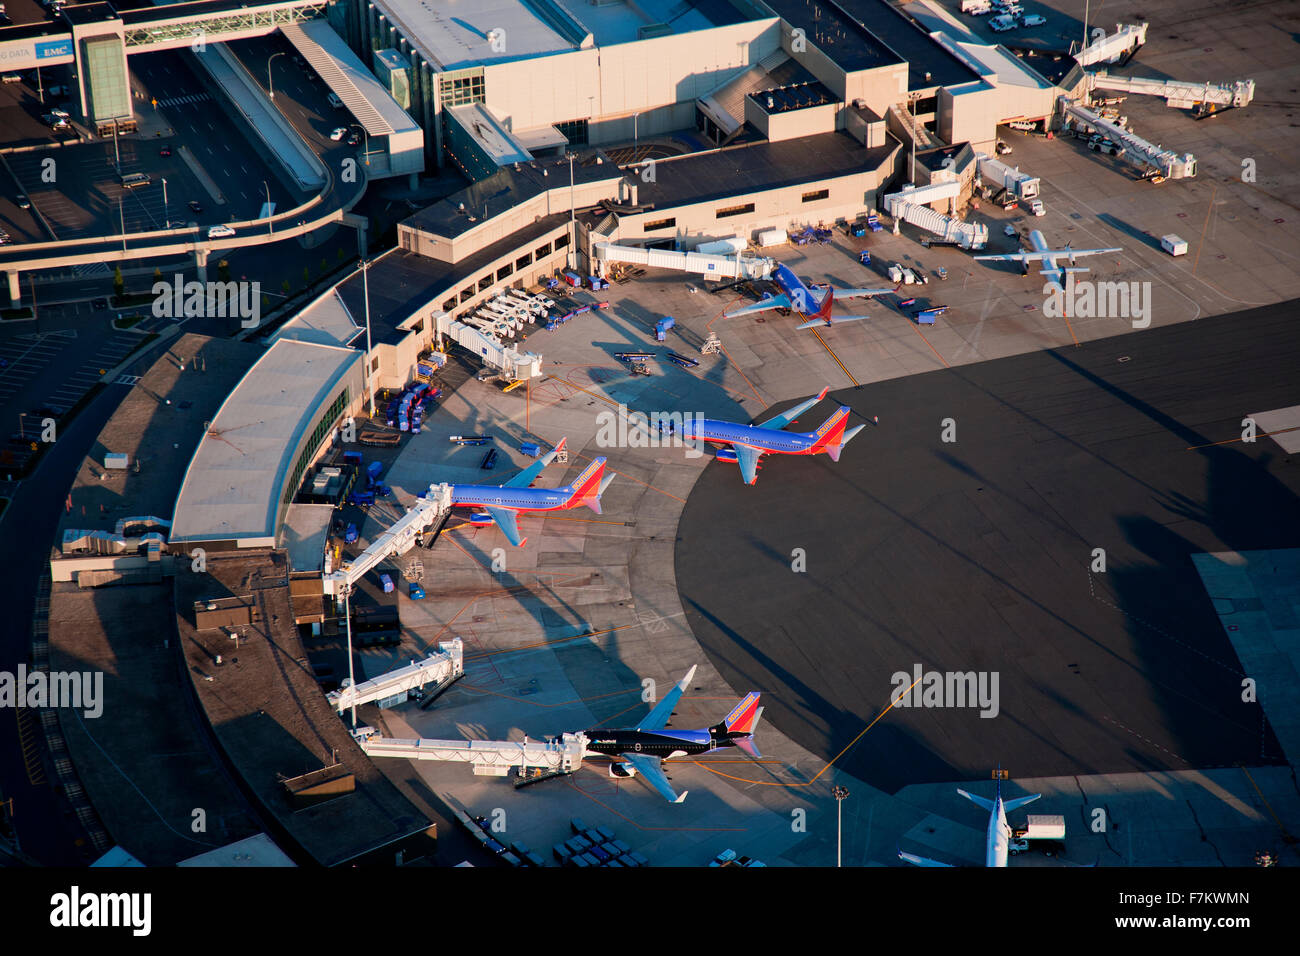 AERIAL VIEW of Southwest Airplanes at Logan International Airport, Boston, MA Stock Photo